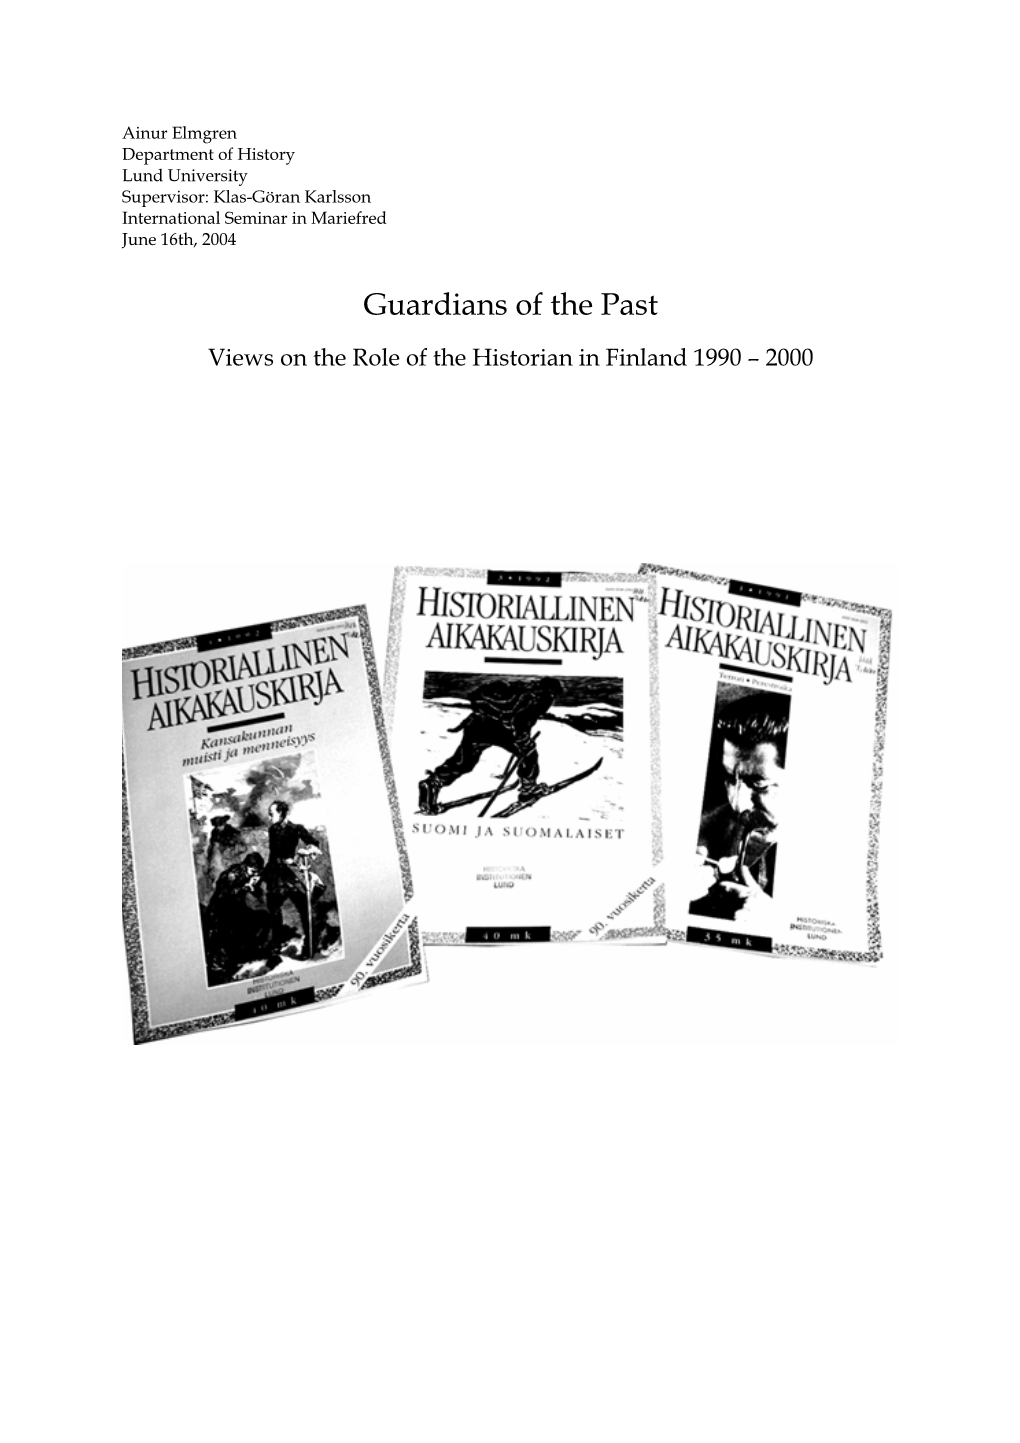 Views on the Role of the Historian in Finland 1990-2000